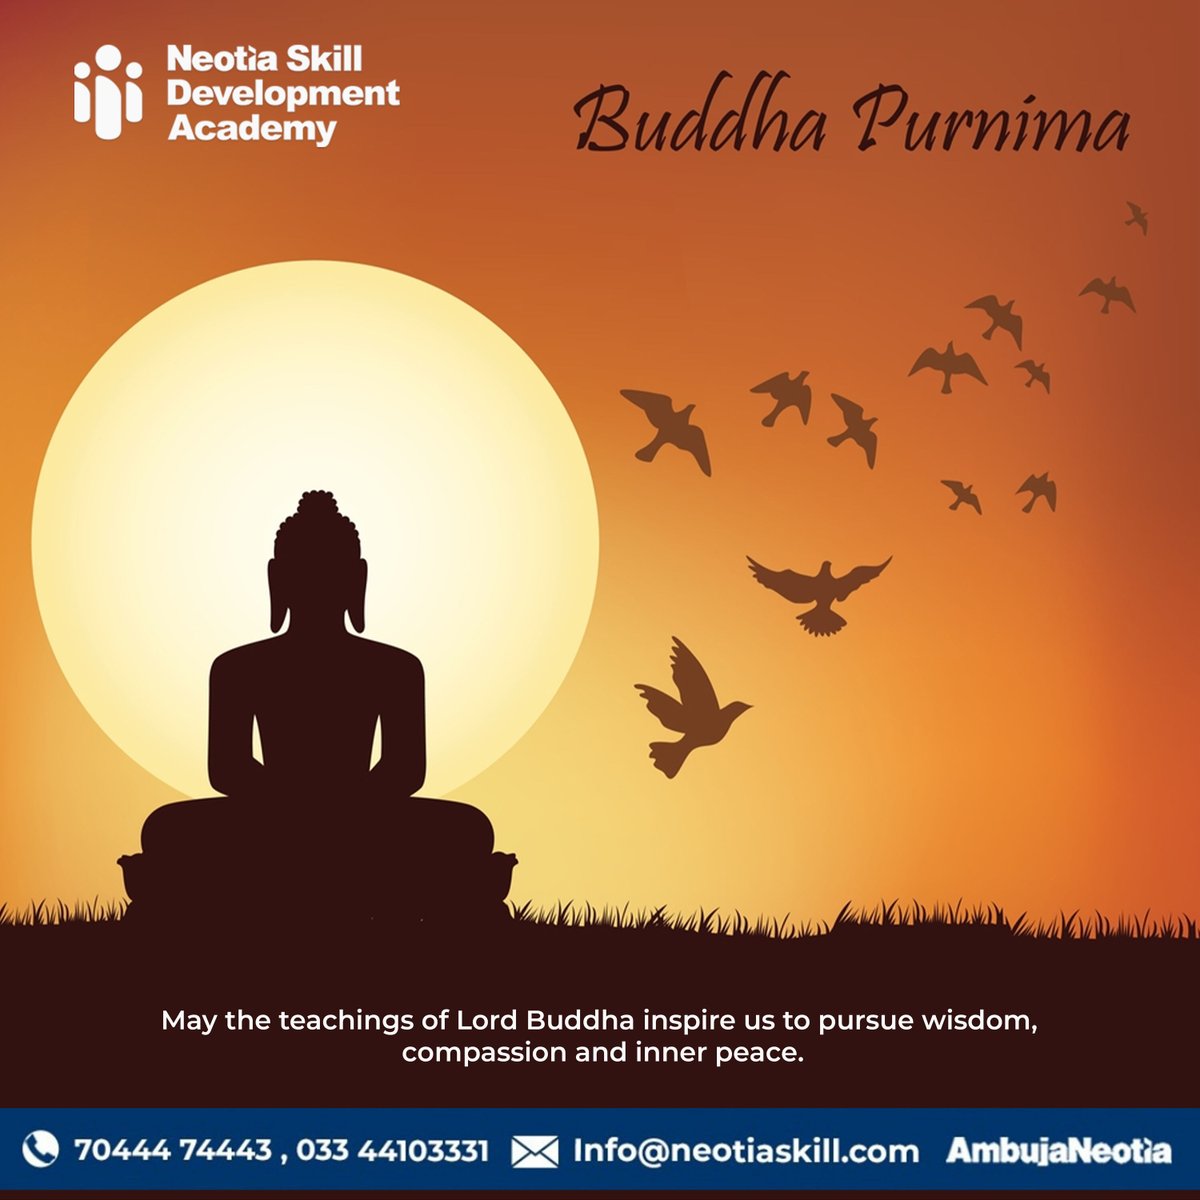 On this Buddha Purnima, let Lord Buddha's wisdom inspire your journey towards career excellence. At Neotia Skill Development Academy, we're here to empower you with the skills to succeed. Embrace growth, learn, and shine! #BuddhaPurnima #CareerGrowth #JobSeekers #SkillDevelopment